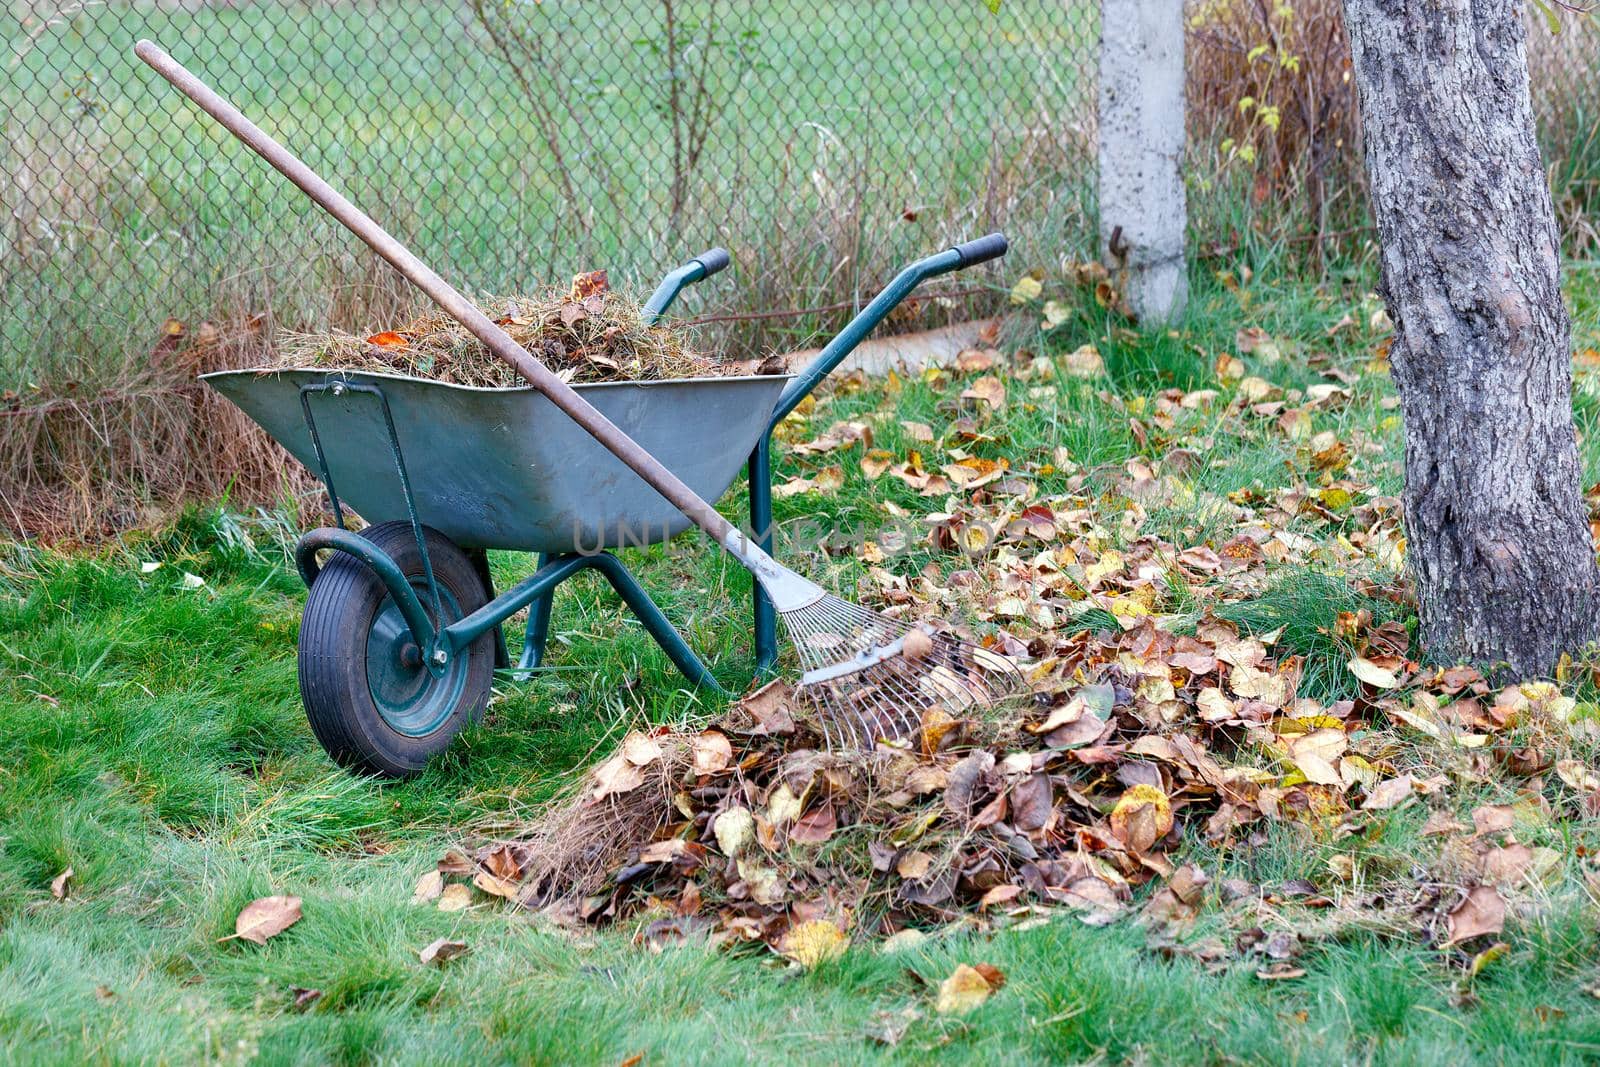 Green lawn care, fallen brown leaves in the autumn garden collected with a metal rake, garden wheelbarrow close-up, image with copy space.